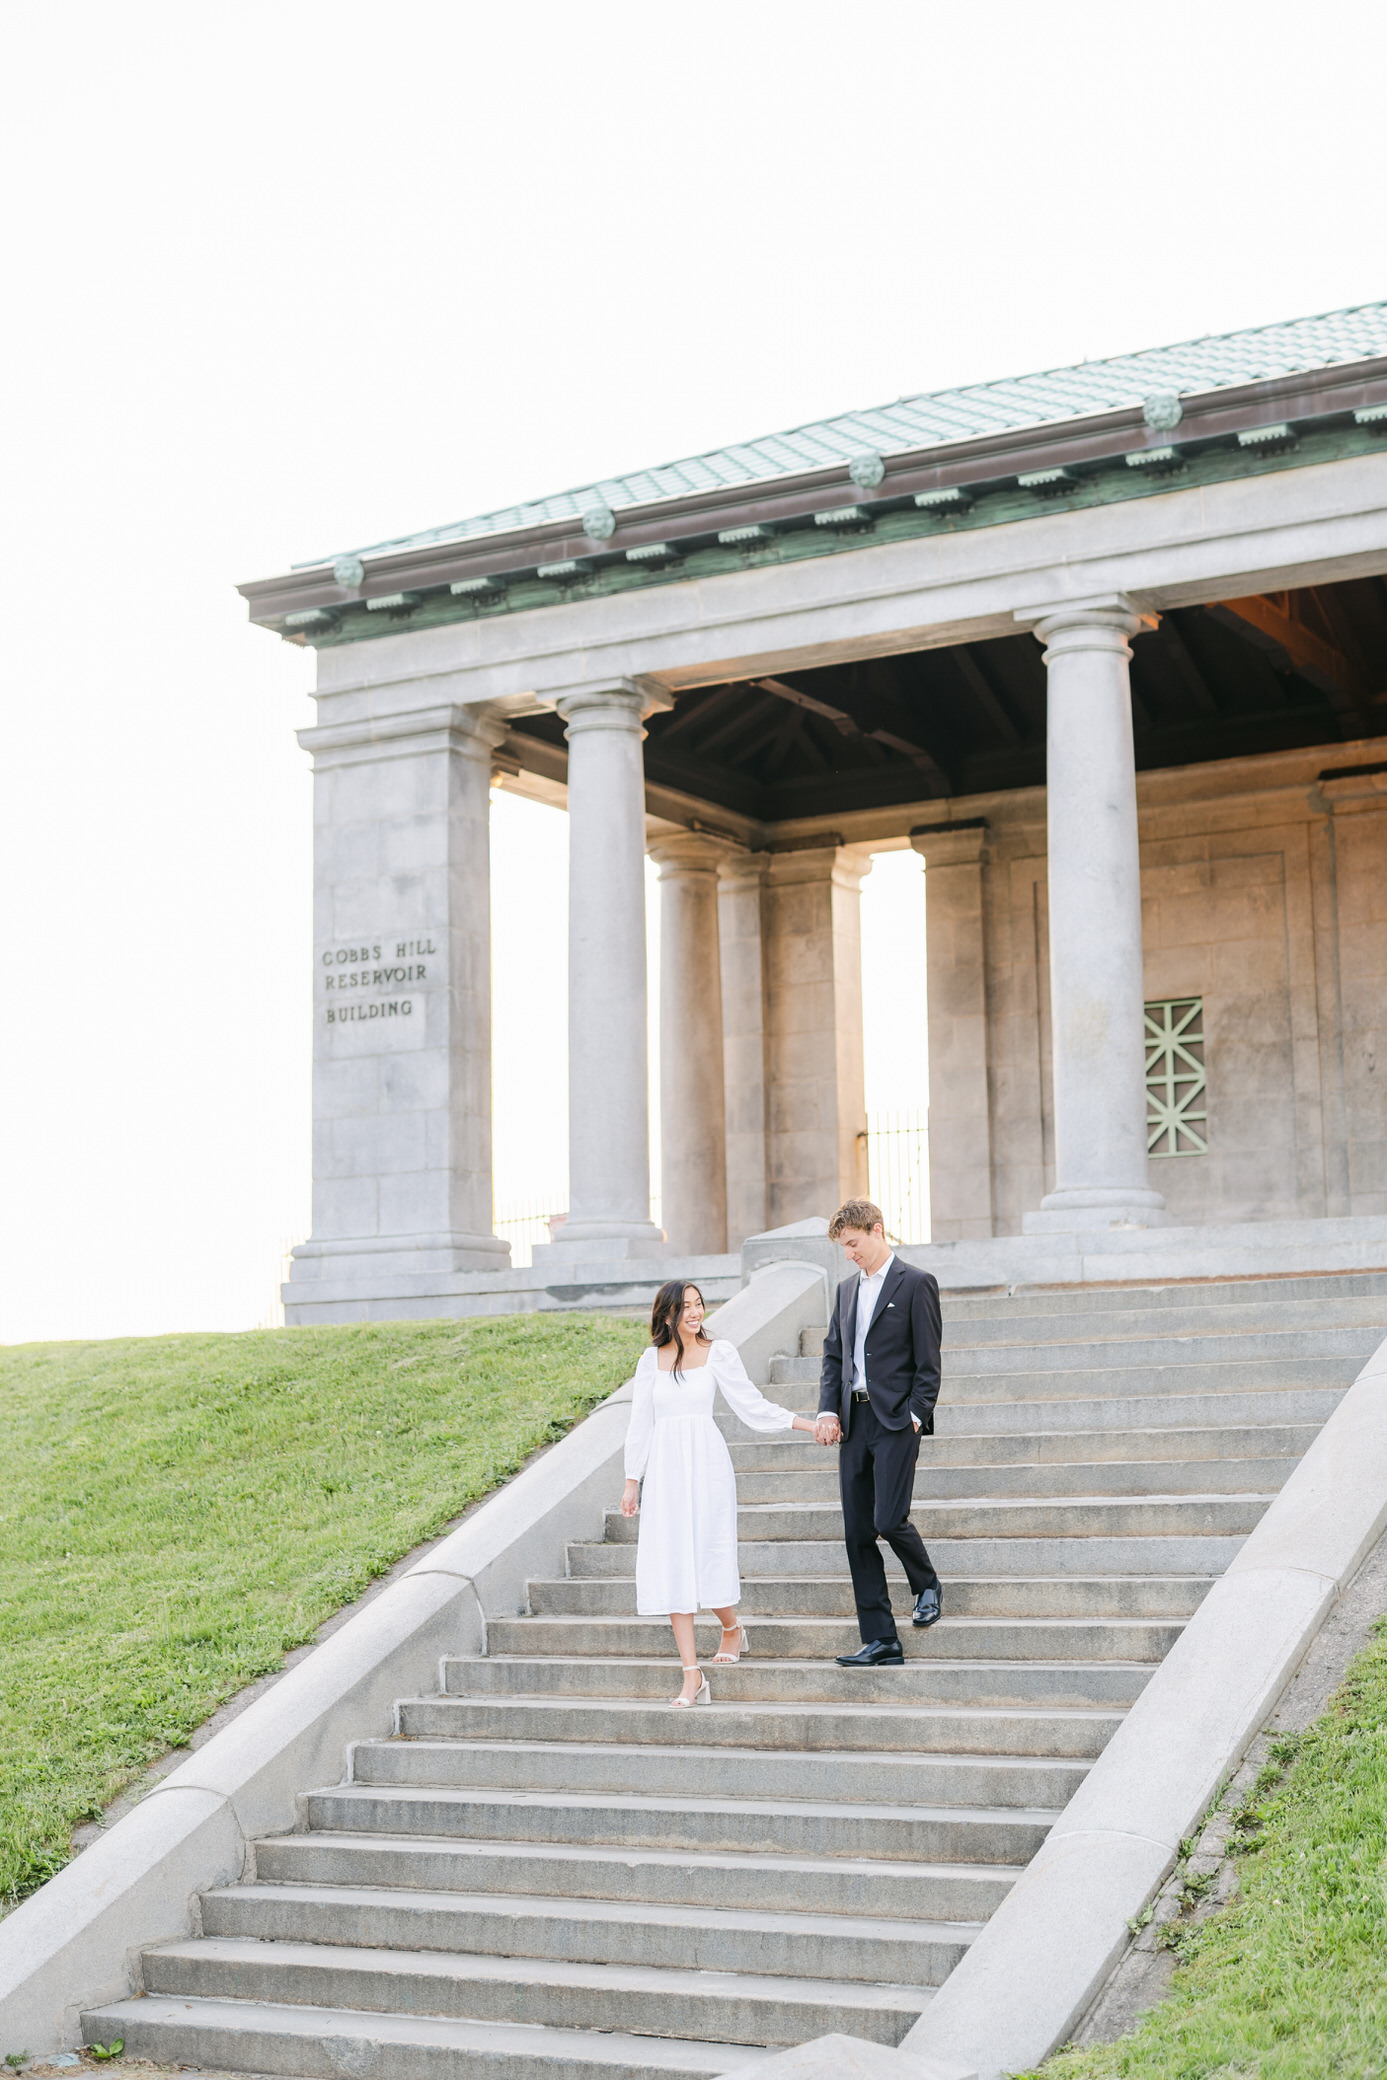 Cobbs Hill Engagement Session
